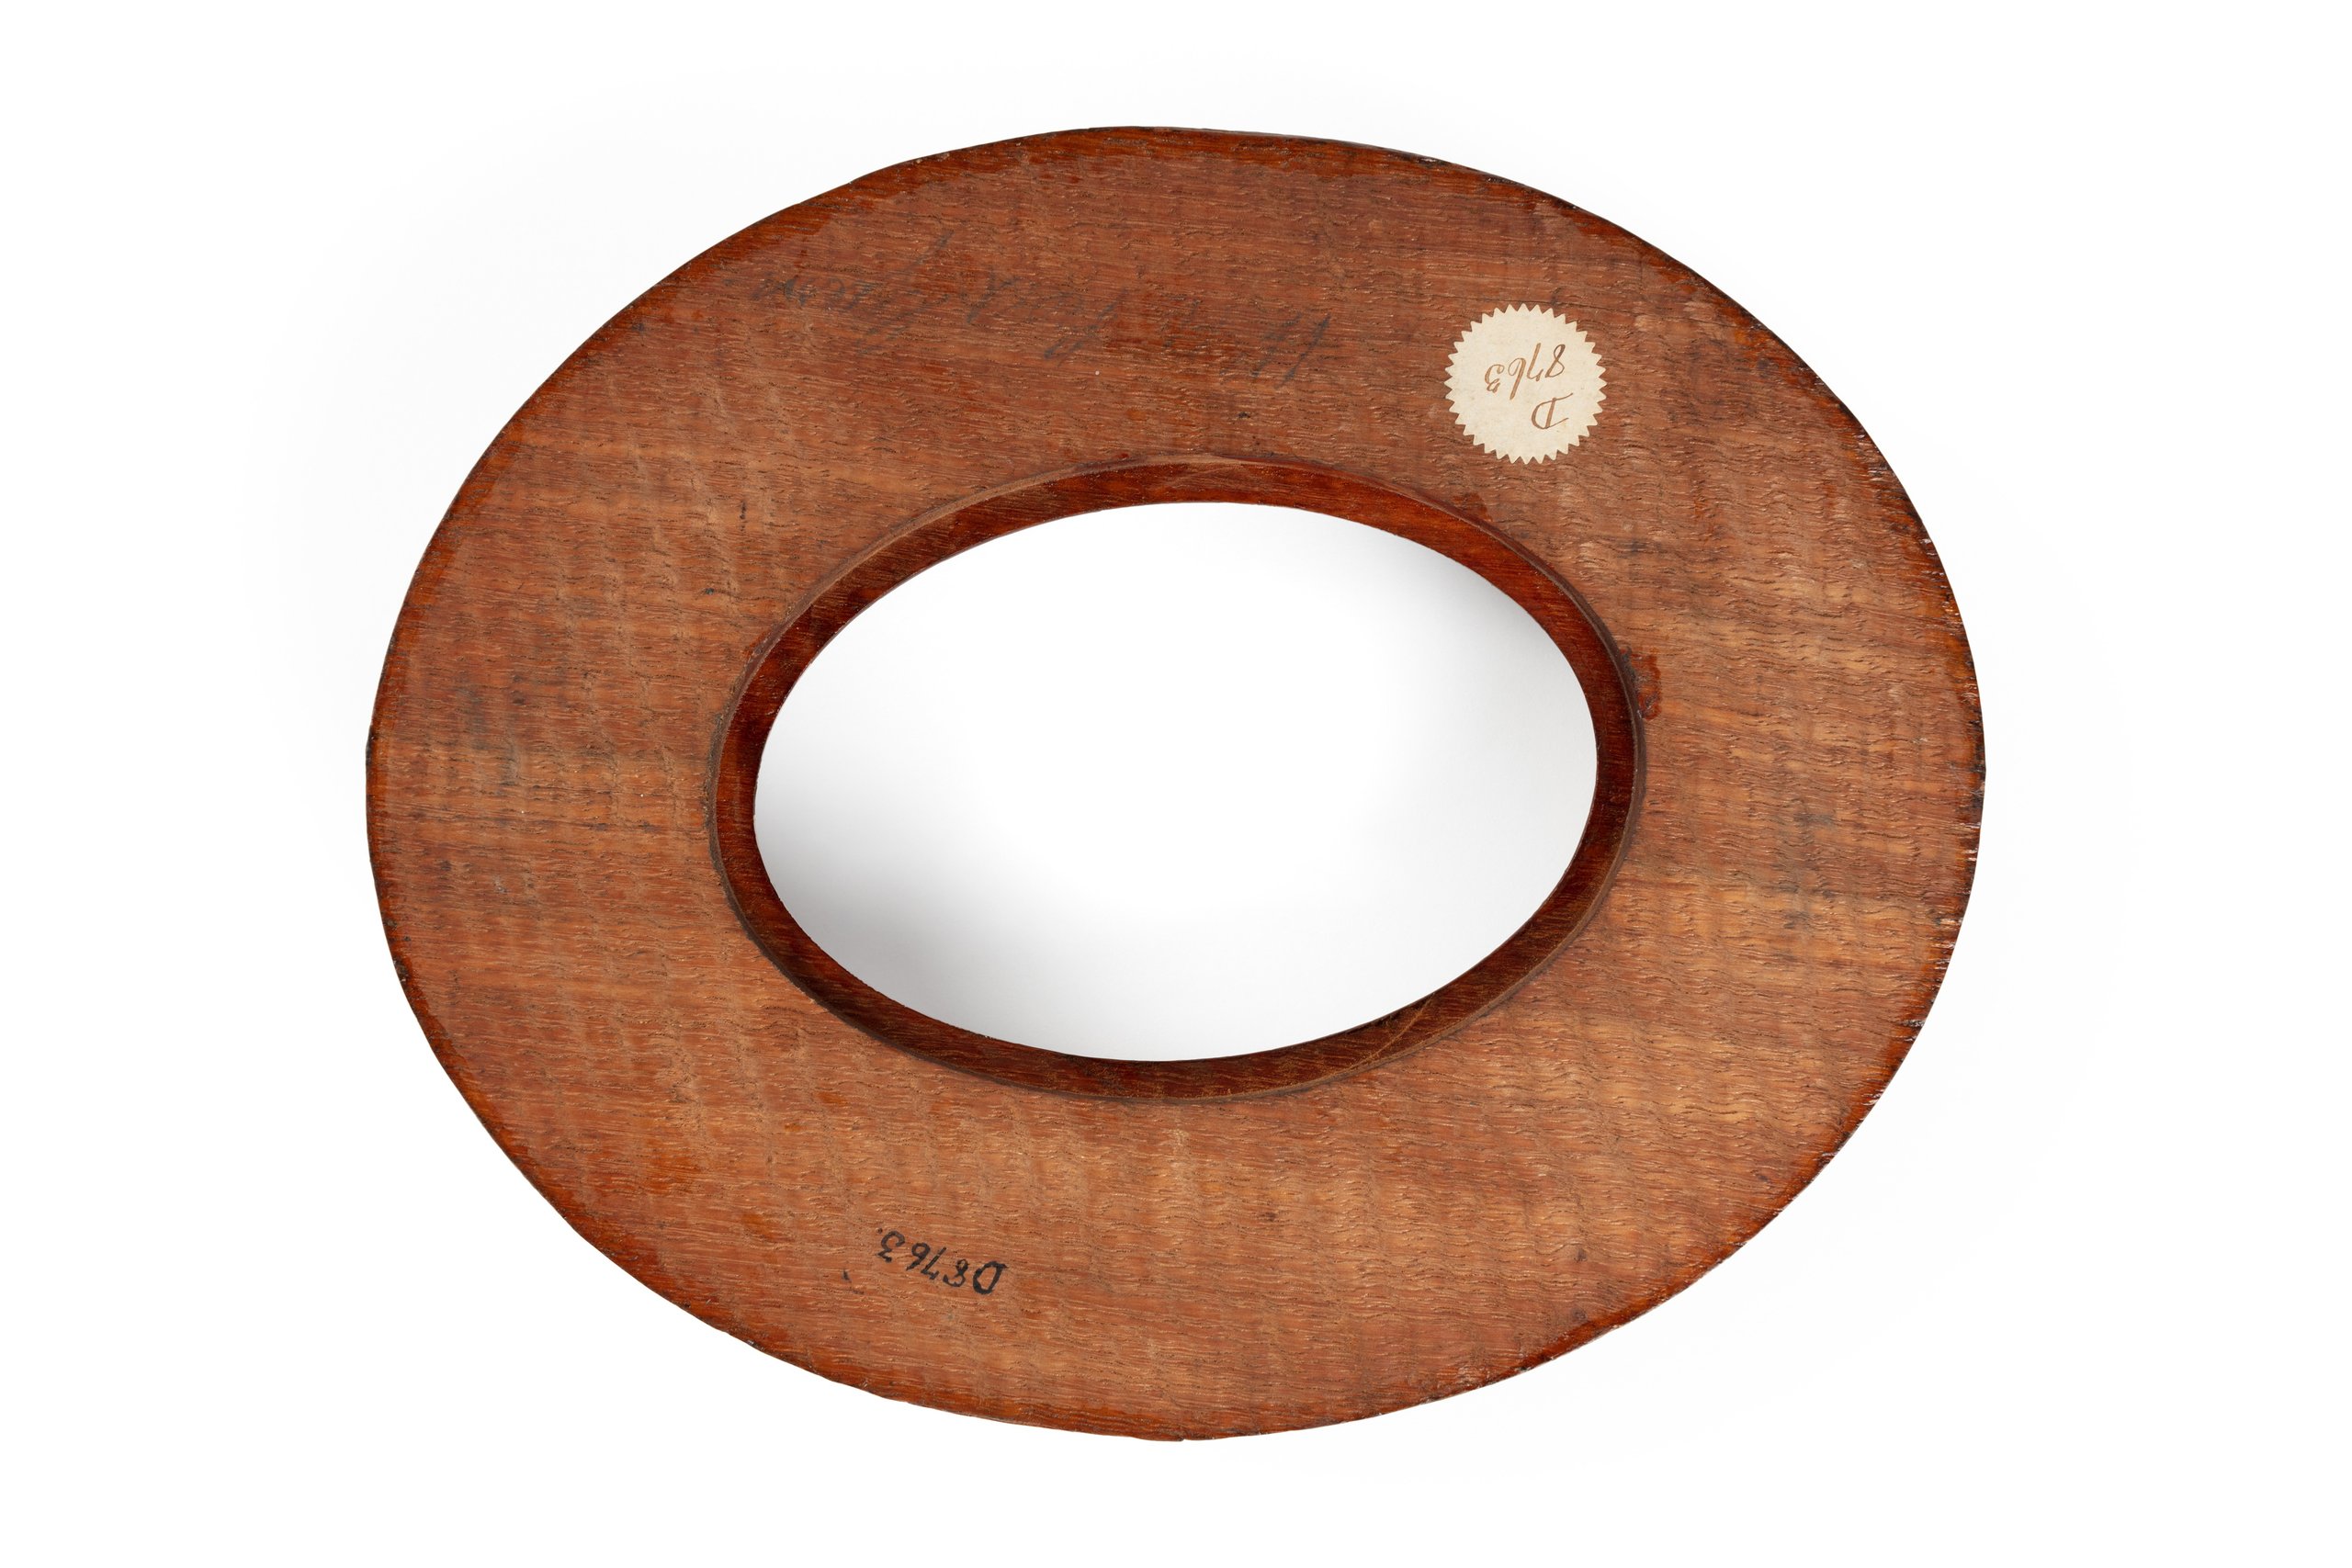 Timber sample, oval picture frame made of Western Australian Red Gum